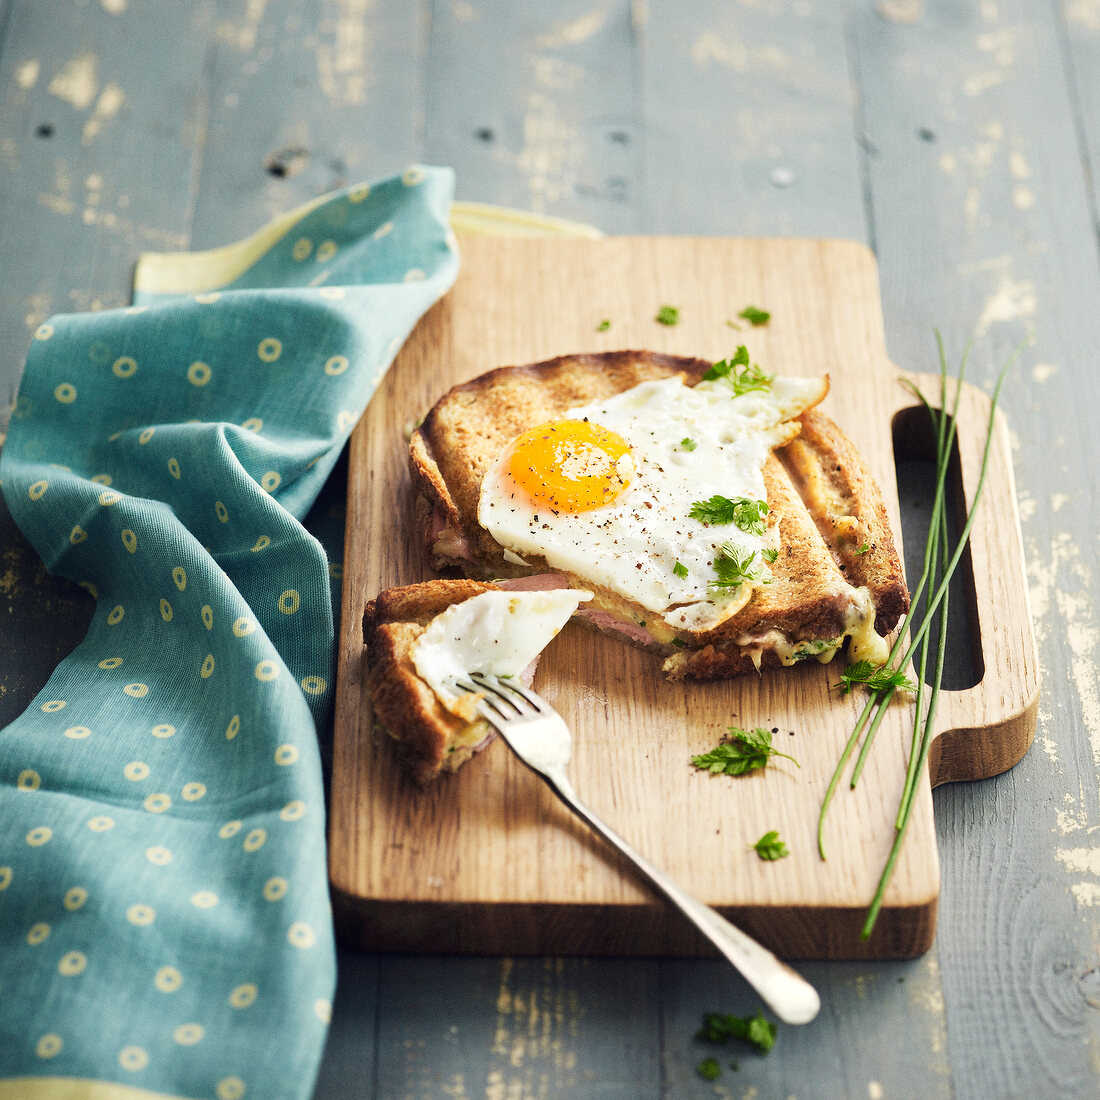 Cheese and ham toasted sandwich topped with a fried egg and sprinkled with herbs